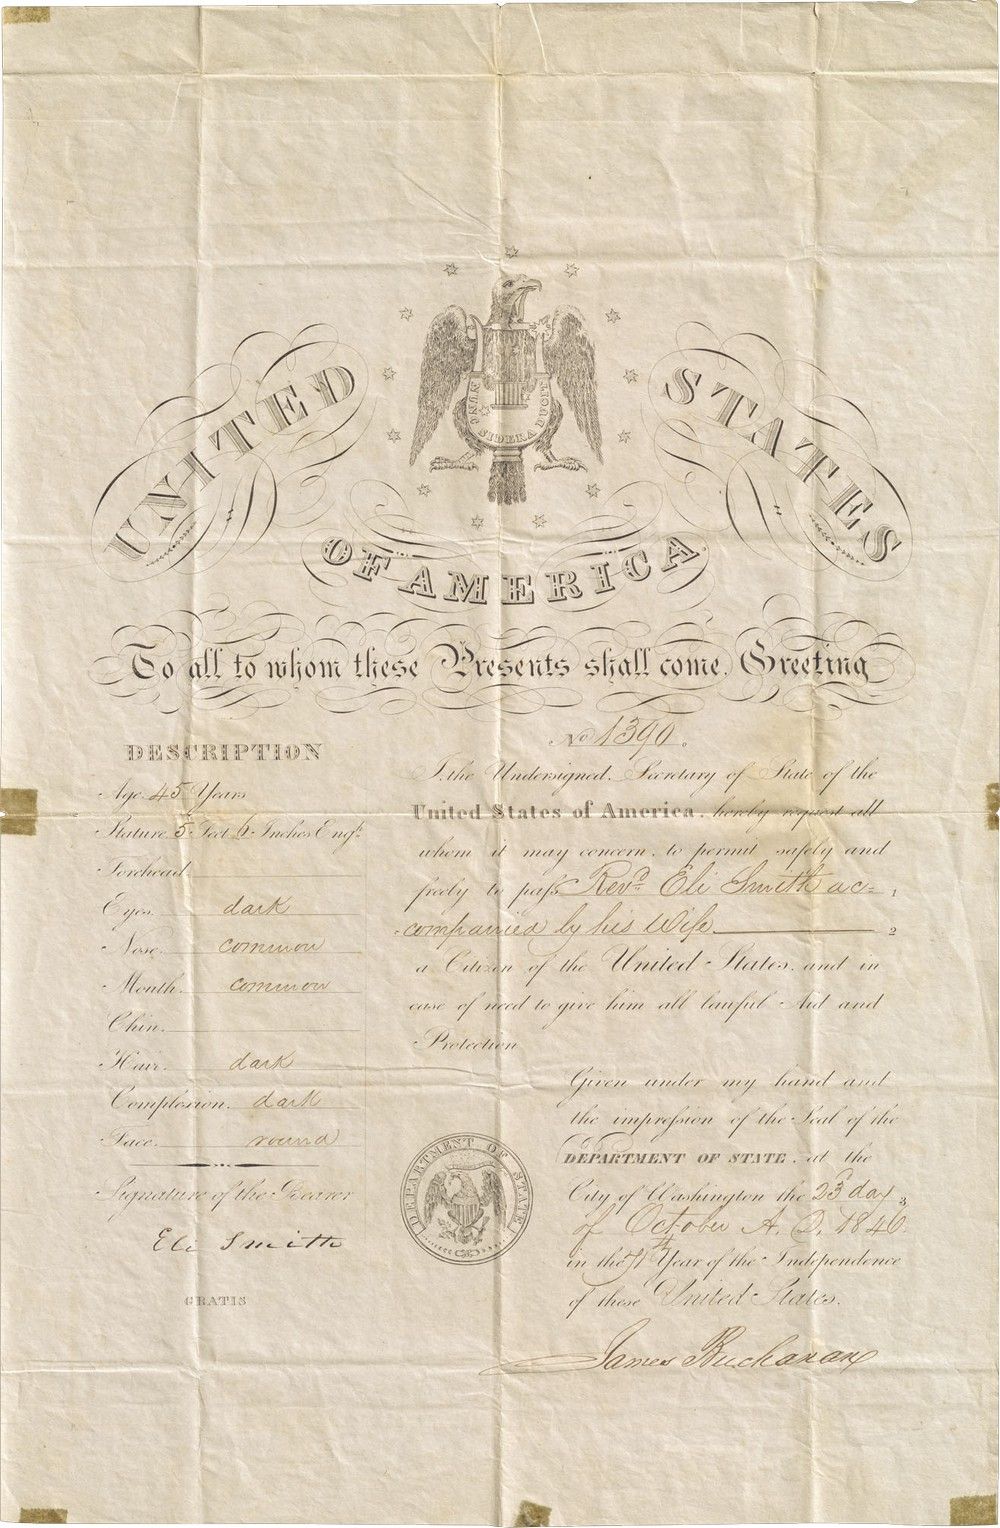 Passport for the Early Explorer of Jerusalem, the Reverend Eli Smith, Signed by James Buchanan